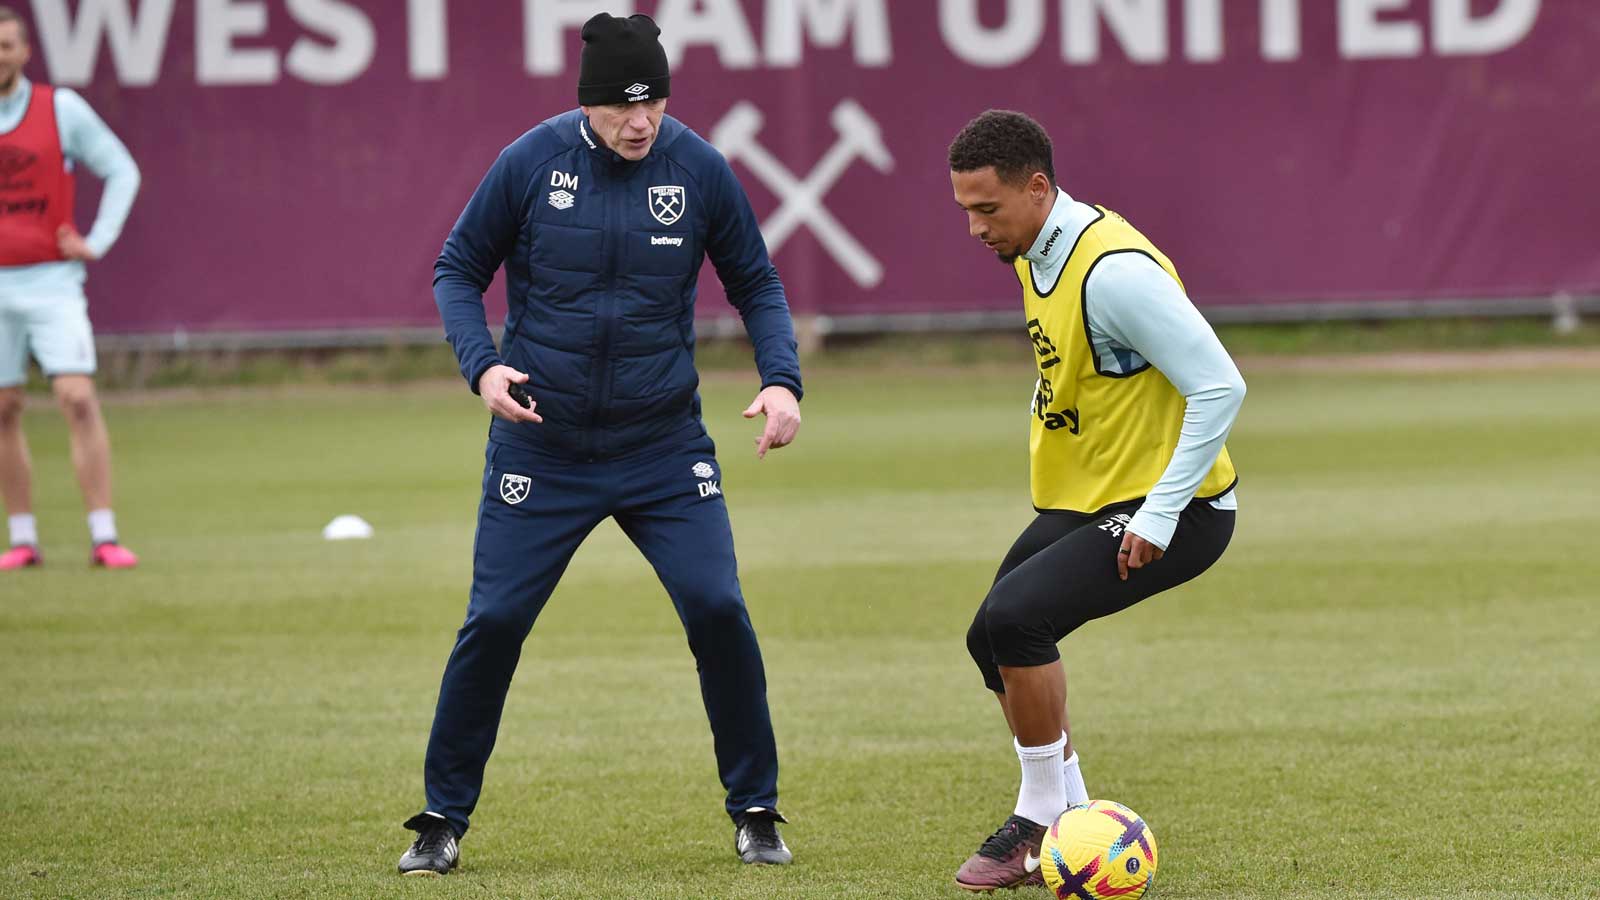 David Moyes oversees training ahead of Sunday's game at Tottenham Hotspur